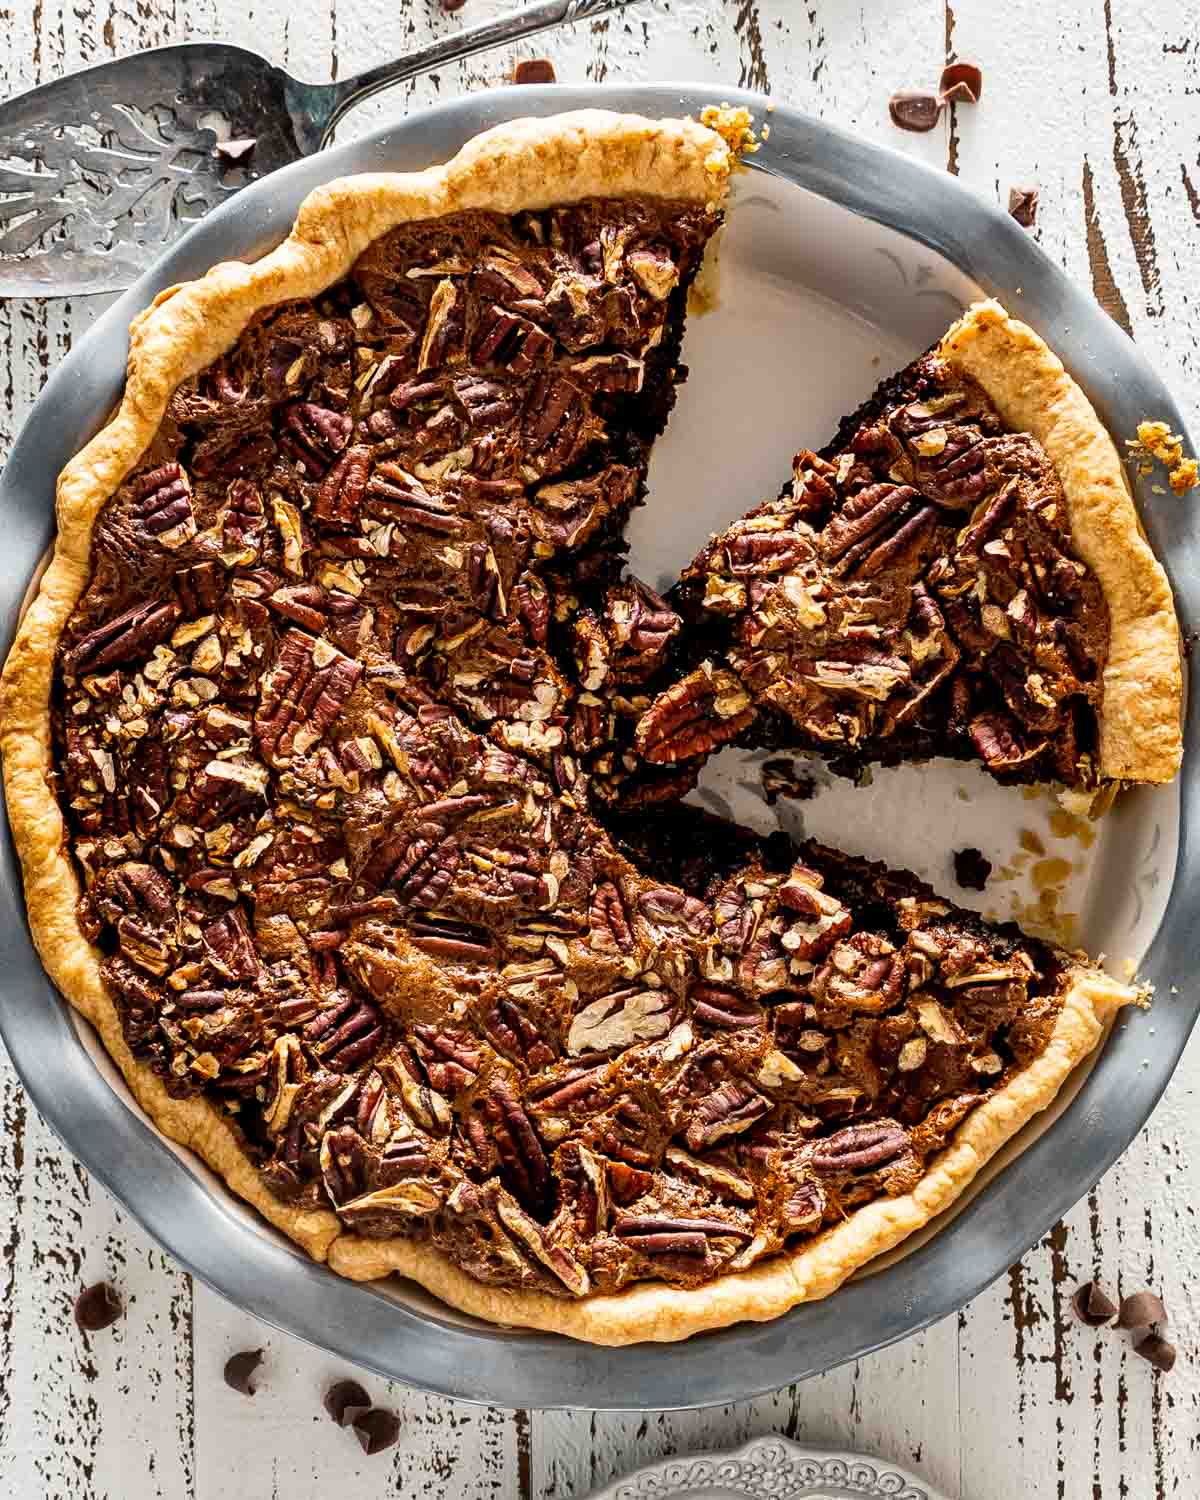 freshly baked chocolate pecan pie in a pie plate with a slice cut out.